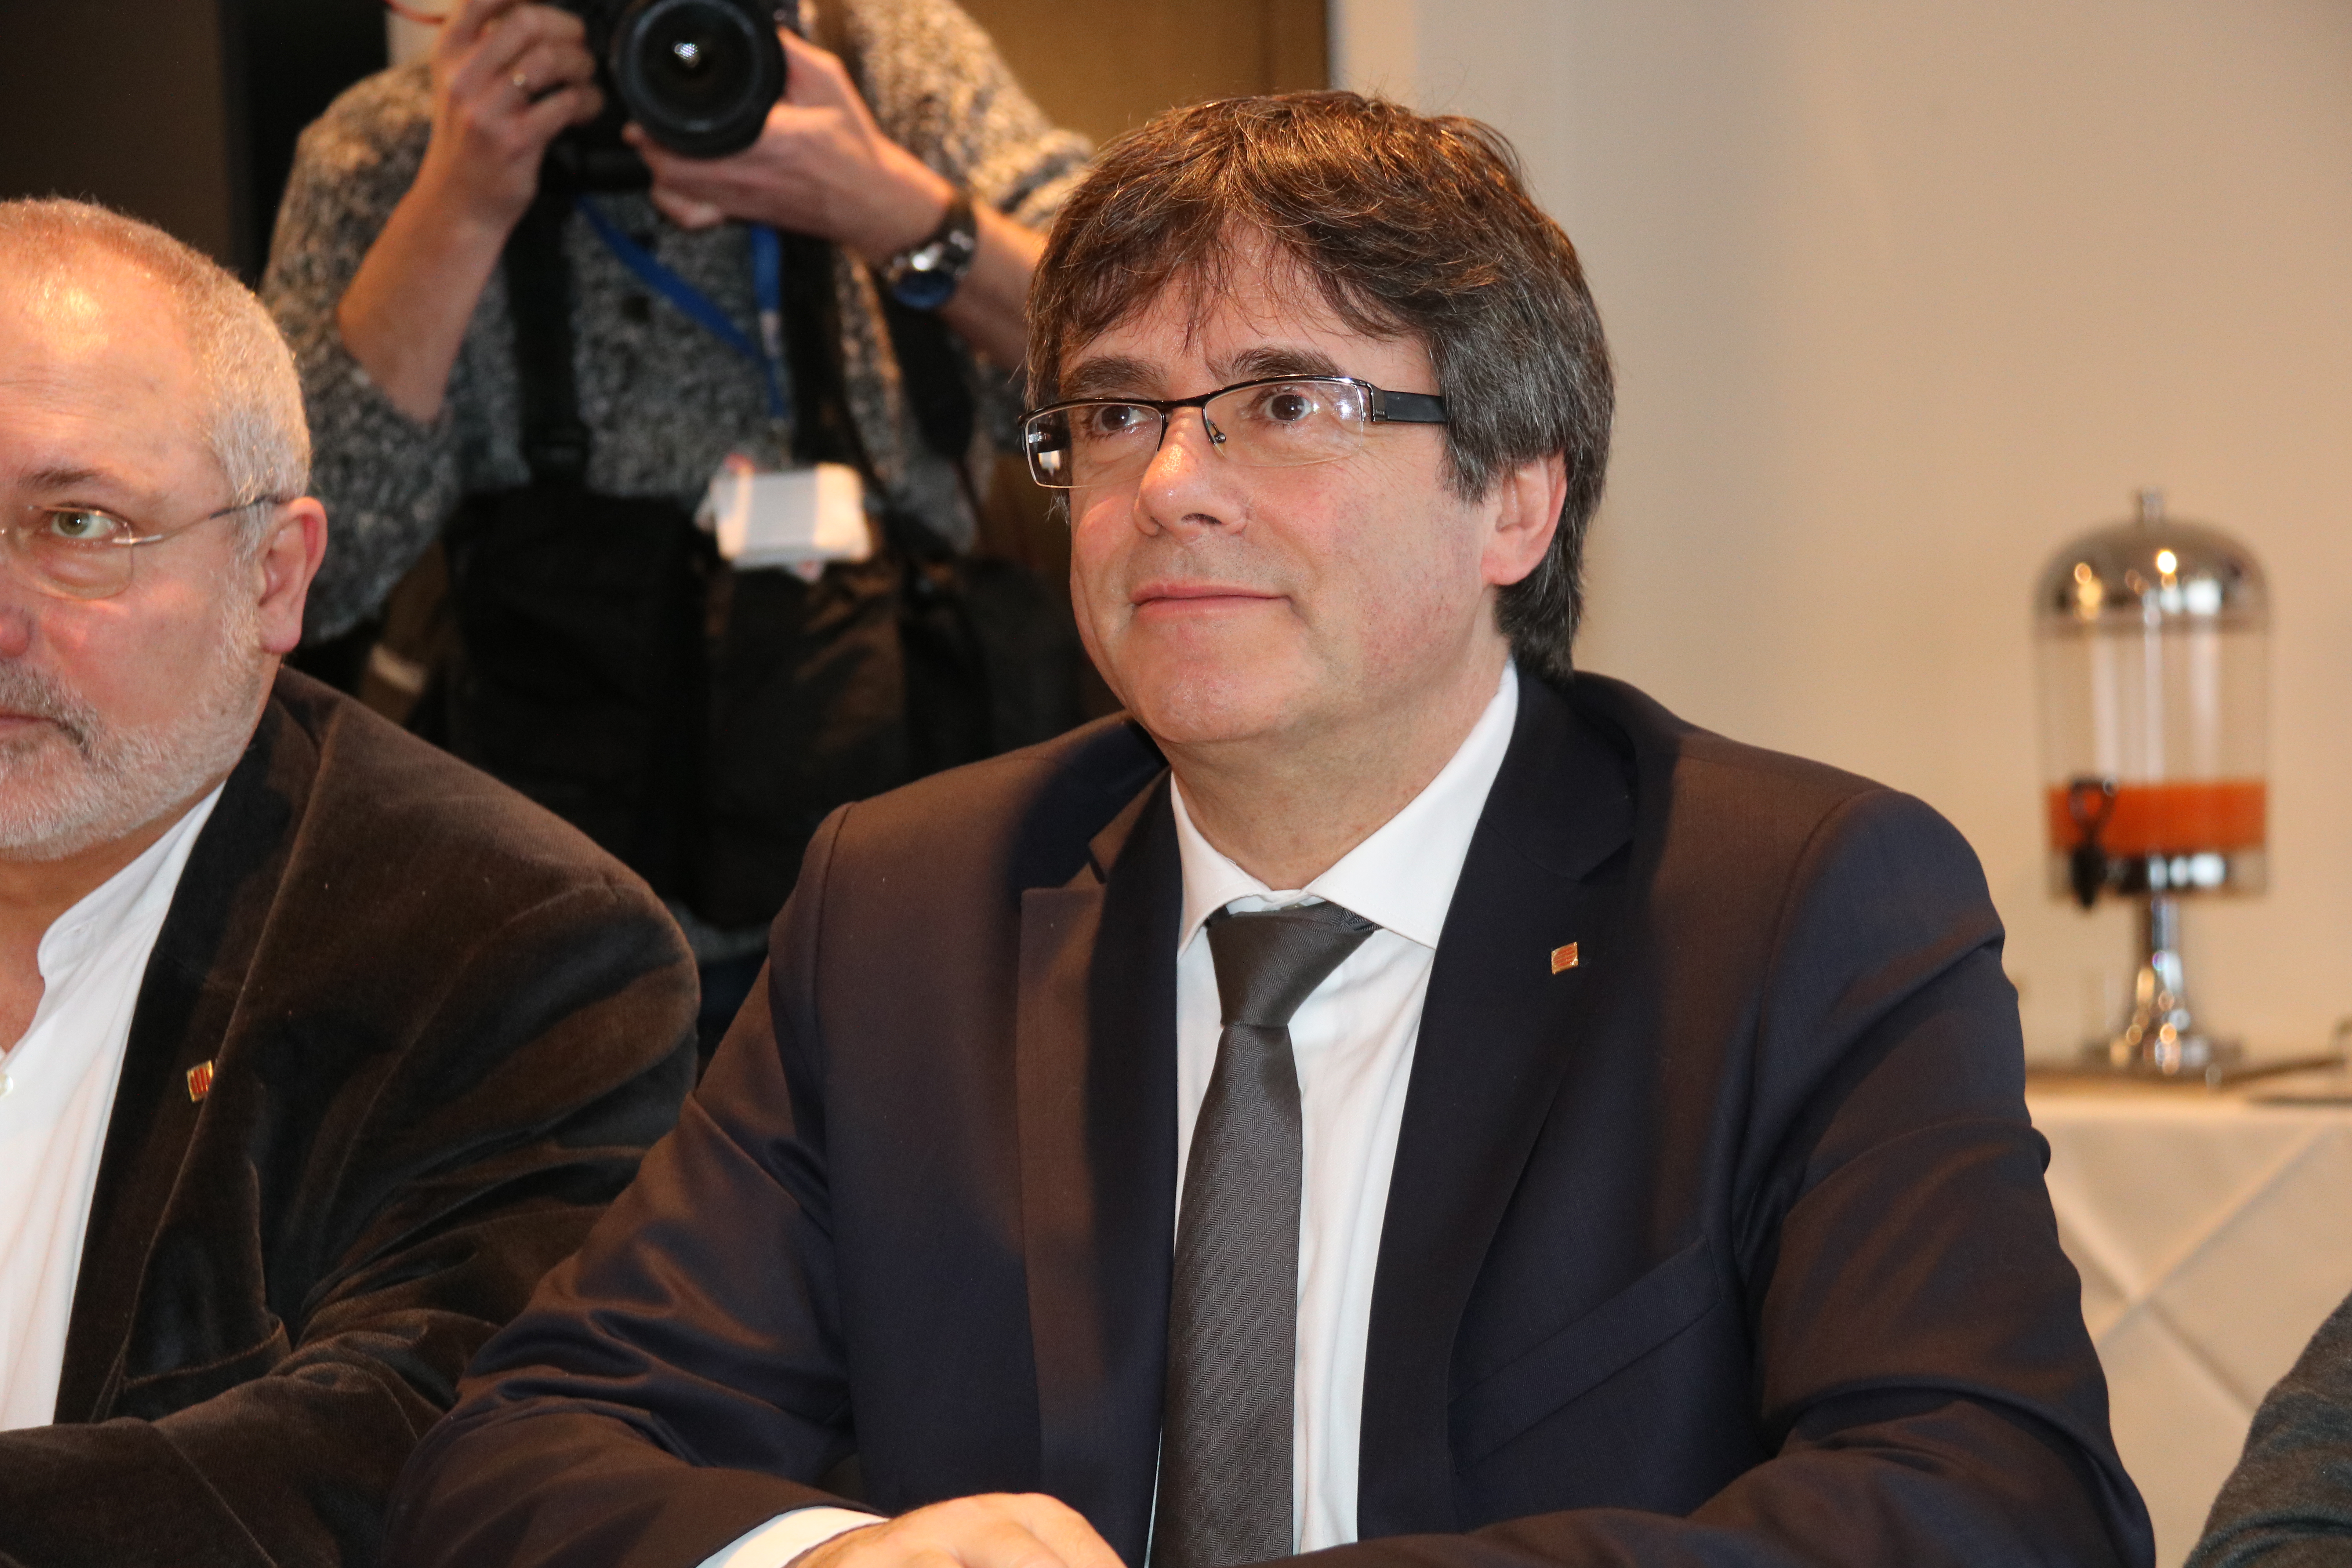 Puigdemont in Brussels on February 5 (by Laura Pous)